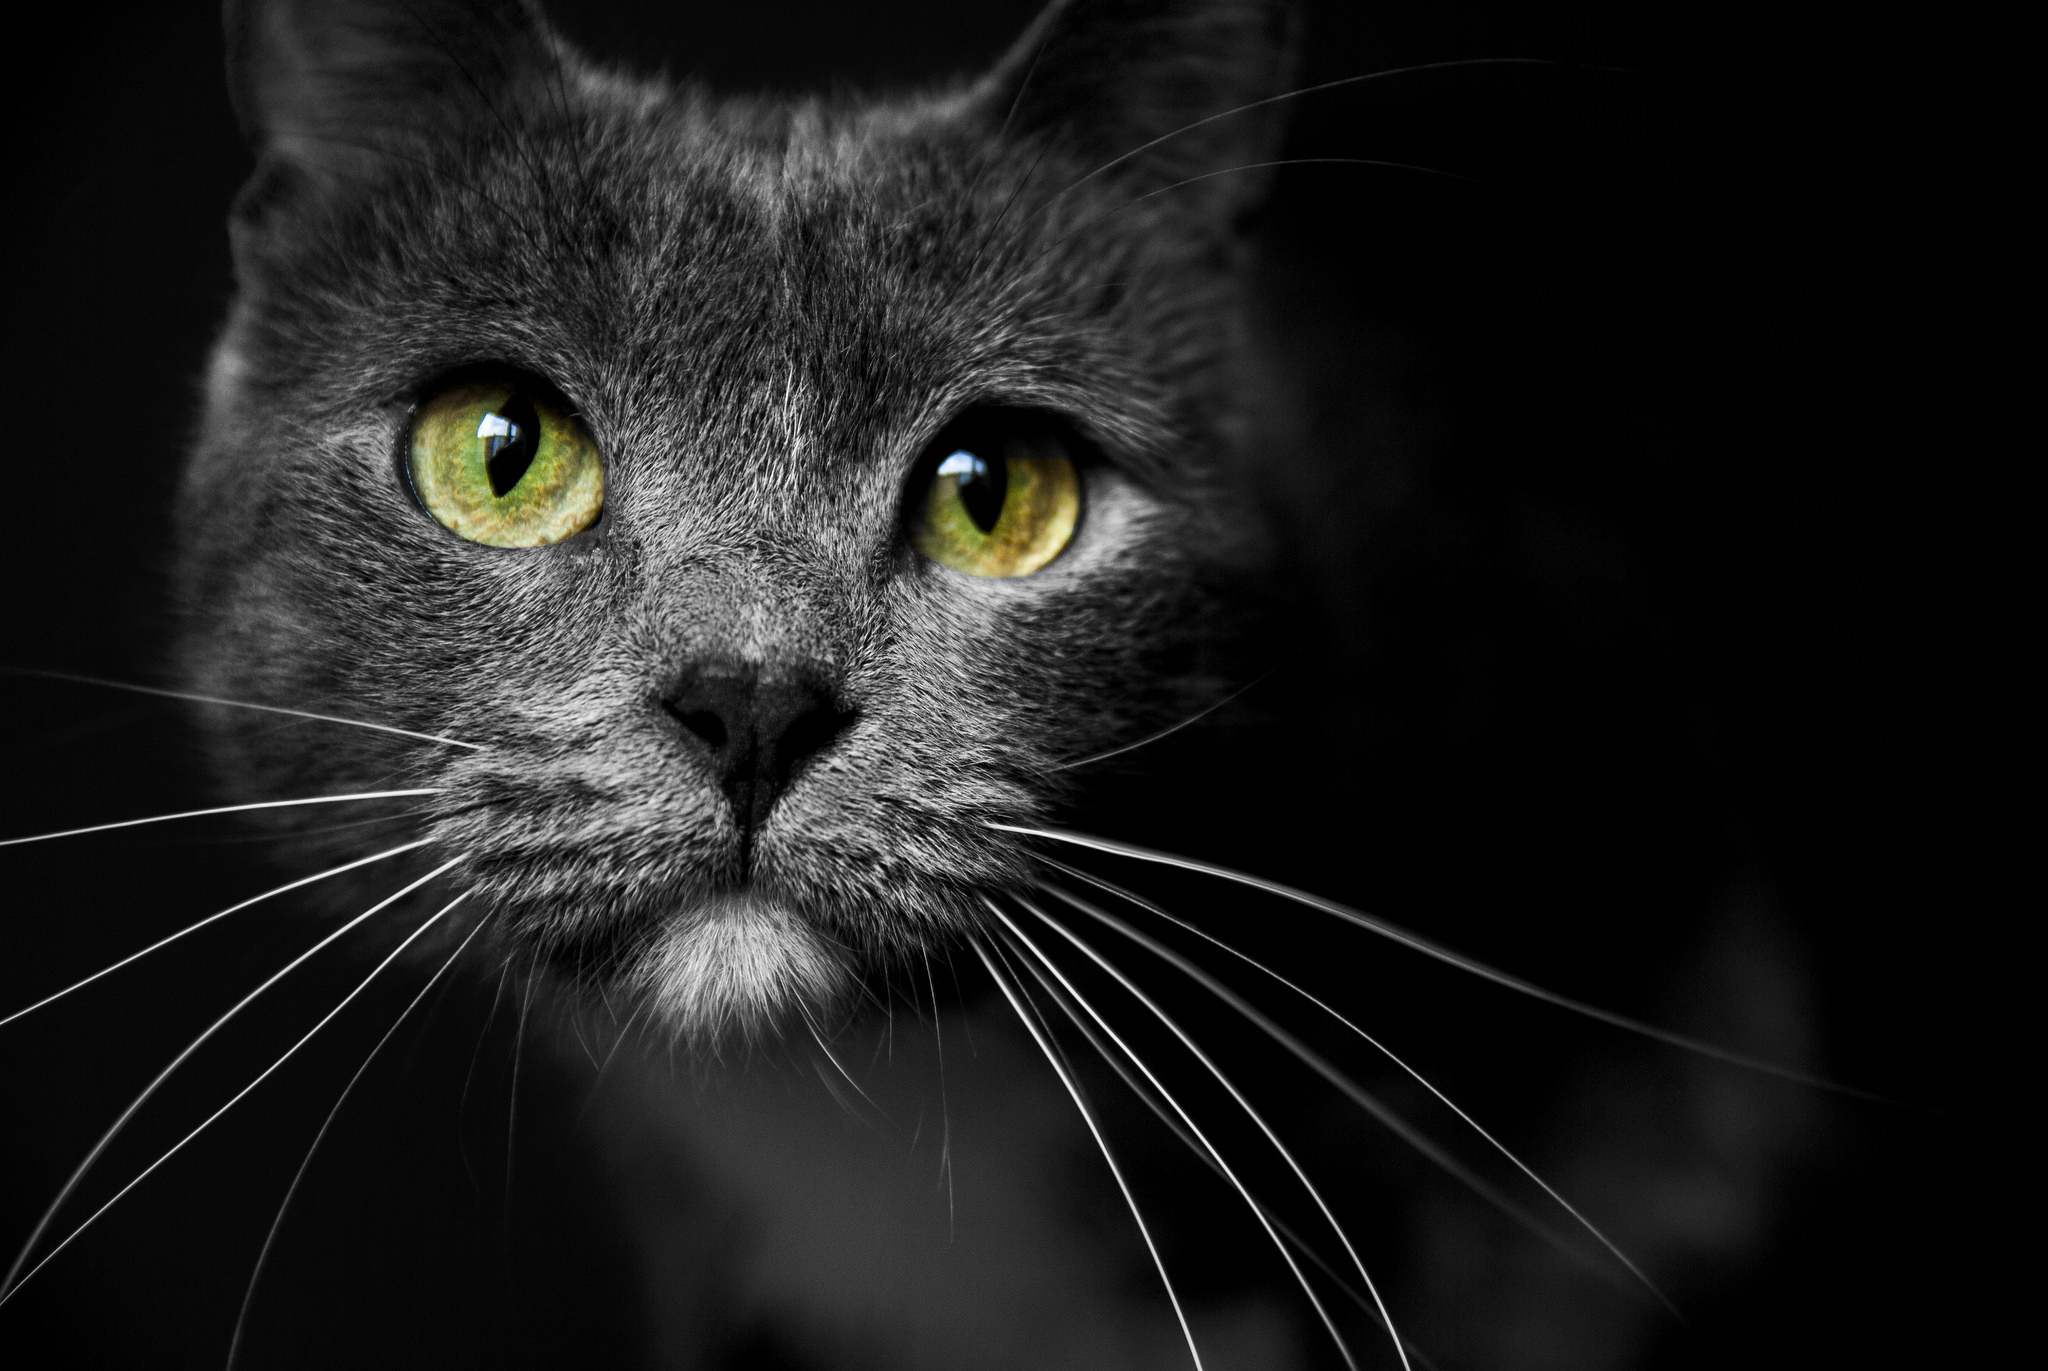 Muzzle of a cat with green eyes wallpapers and images - wallpapers